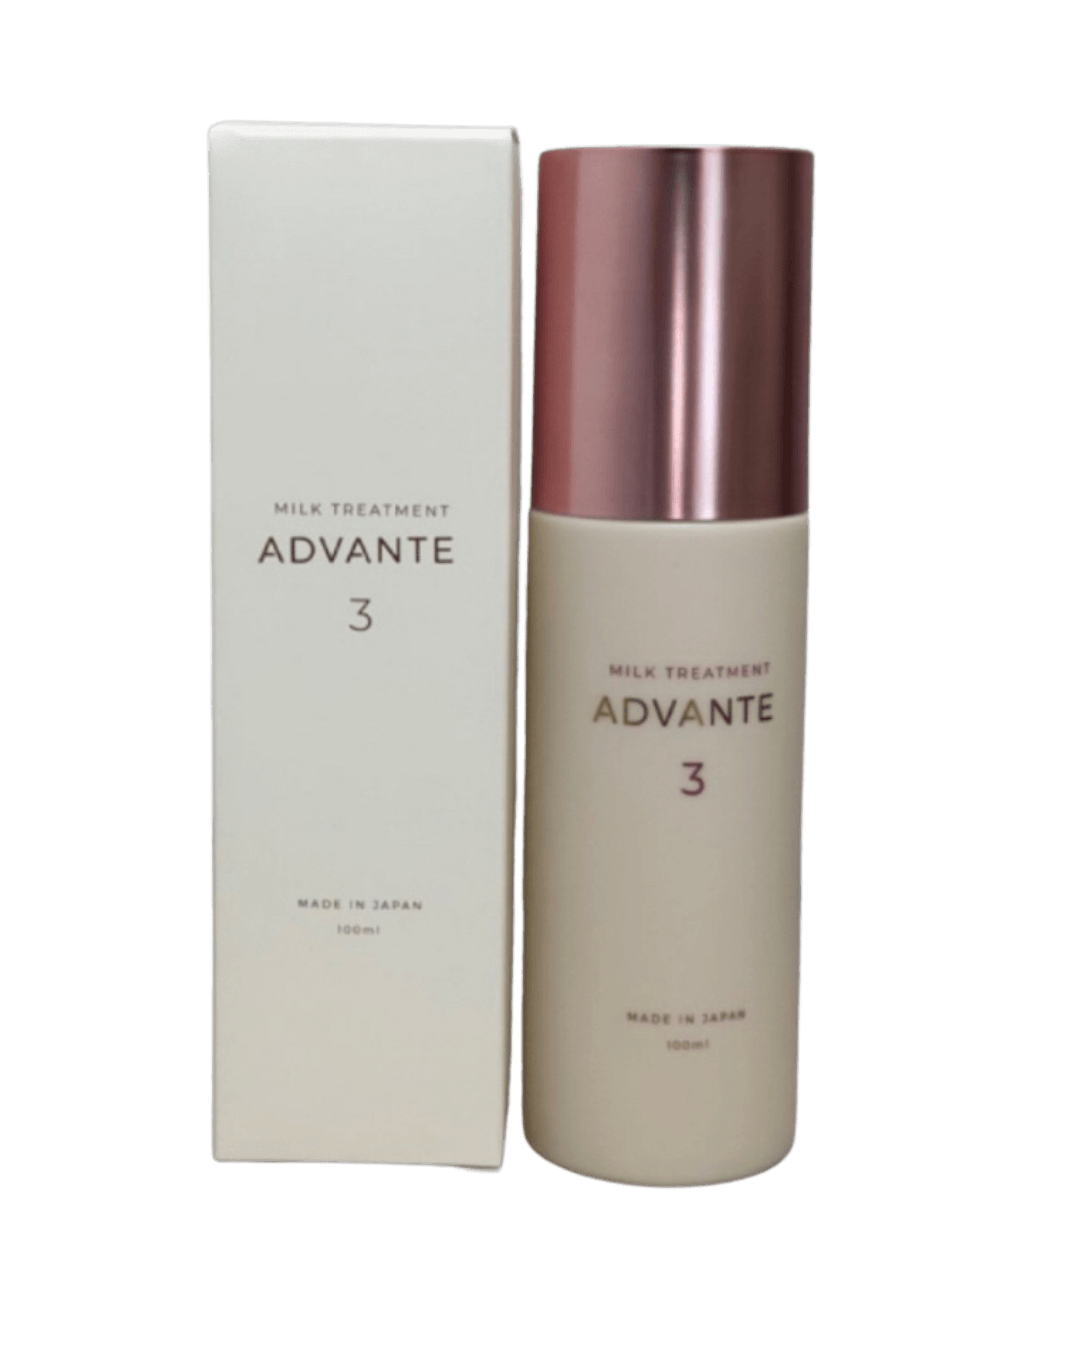 Daily Vanity Beauty Awards 2024 Best  ADVANTE Milk Treatment Voted By Beauty Experts